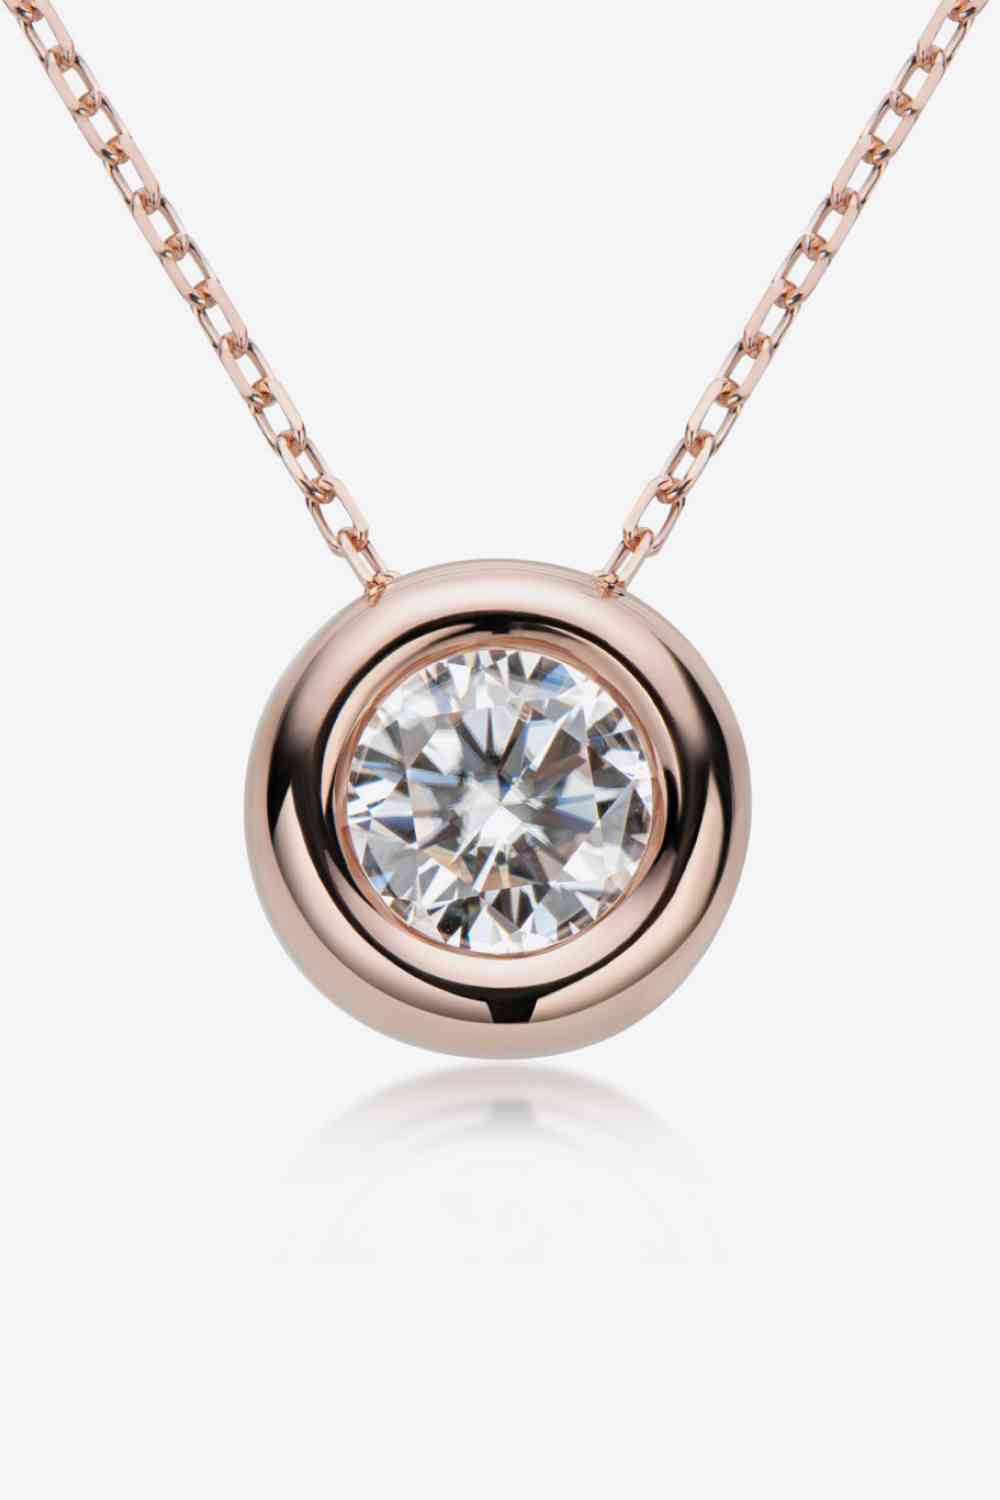 Adored 1 Carat Moissanite Pendant 925 Sterling Silver Necklace Rose Gold One Size